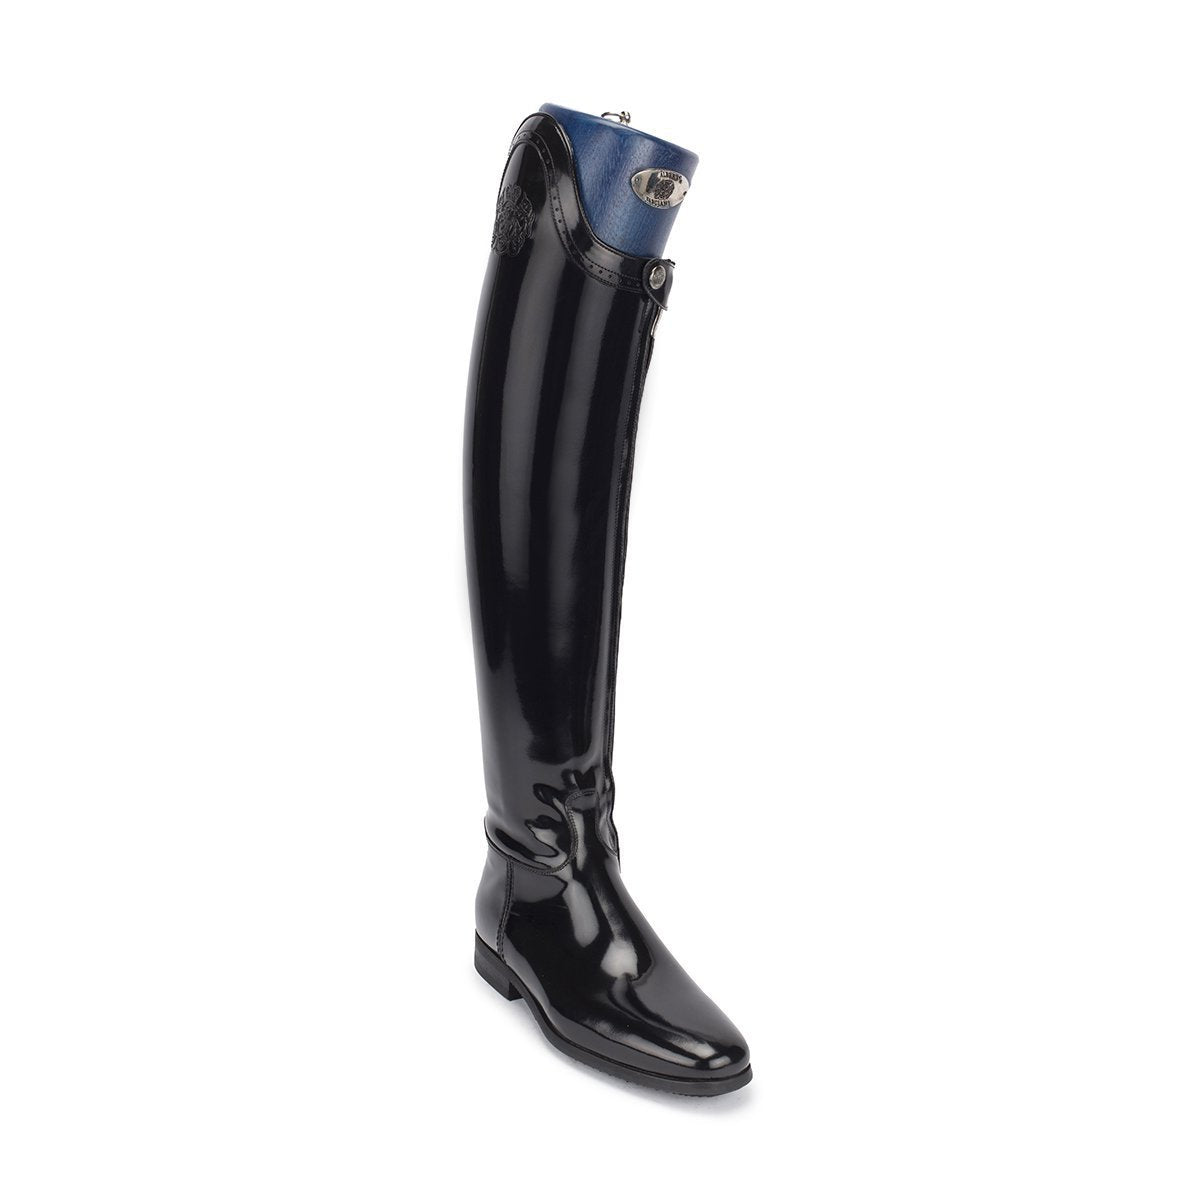 Step up your riding game with Alberto Fasciani's iconic Dressage boots! Made from glossy black calf leather and hand-polished to perfection, these boots blend elegance with comfort. And with the brand's signature logo embossed on the shaft, you're sure to turn heads in the arena. 100% Made in Italy, available in 16 different shaft sizes.